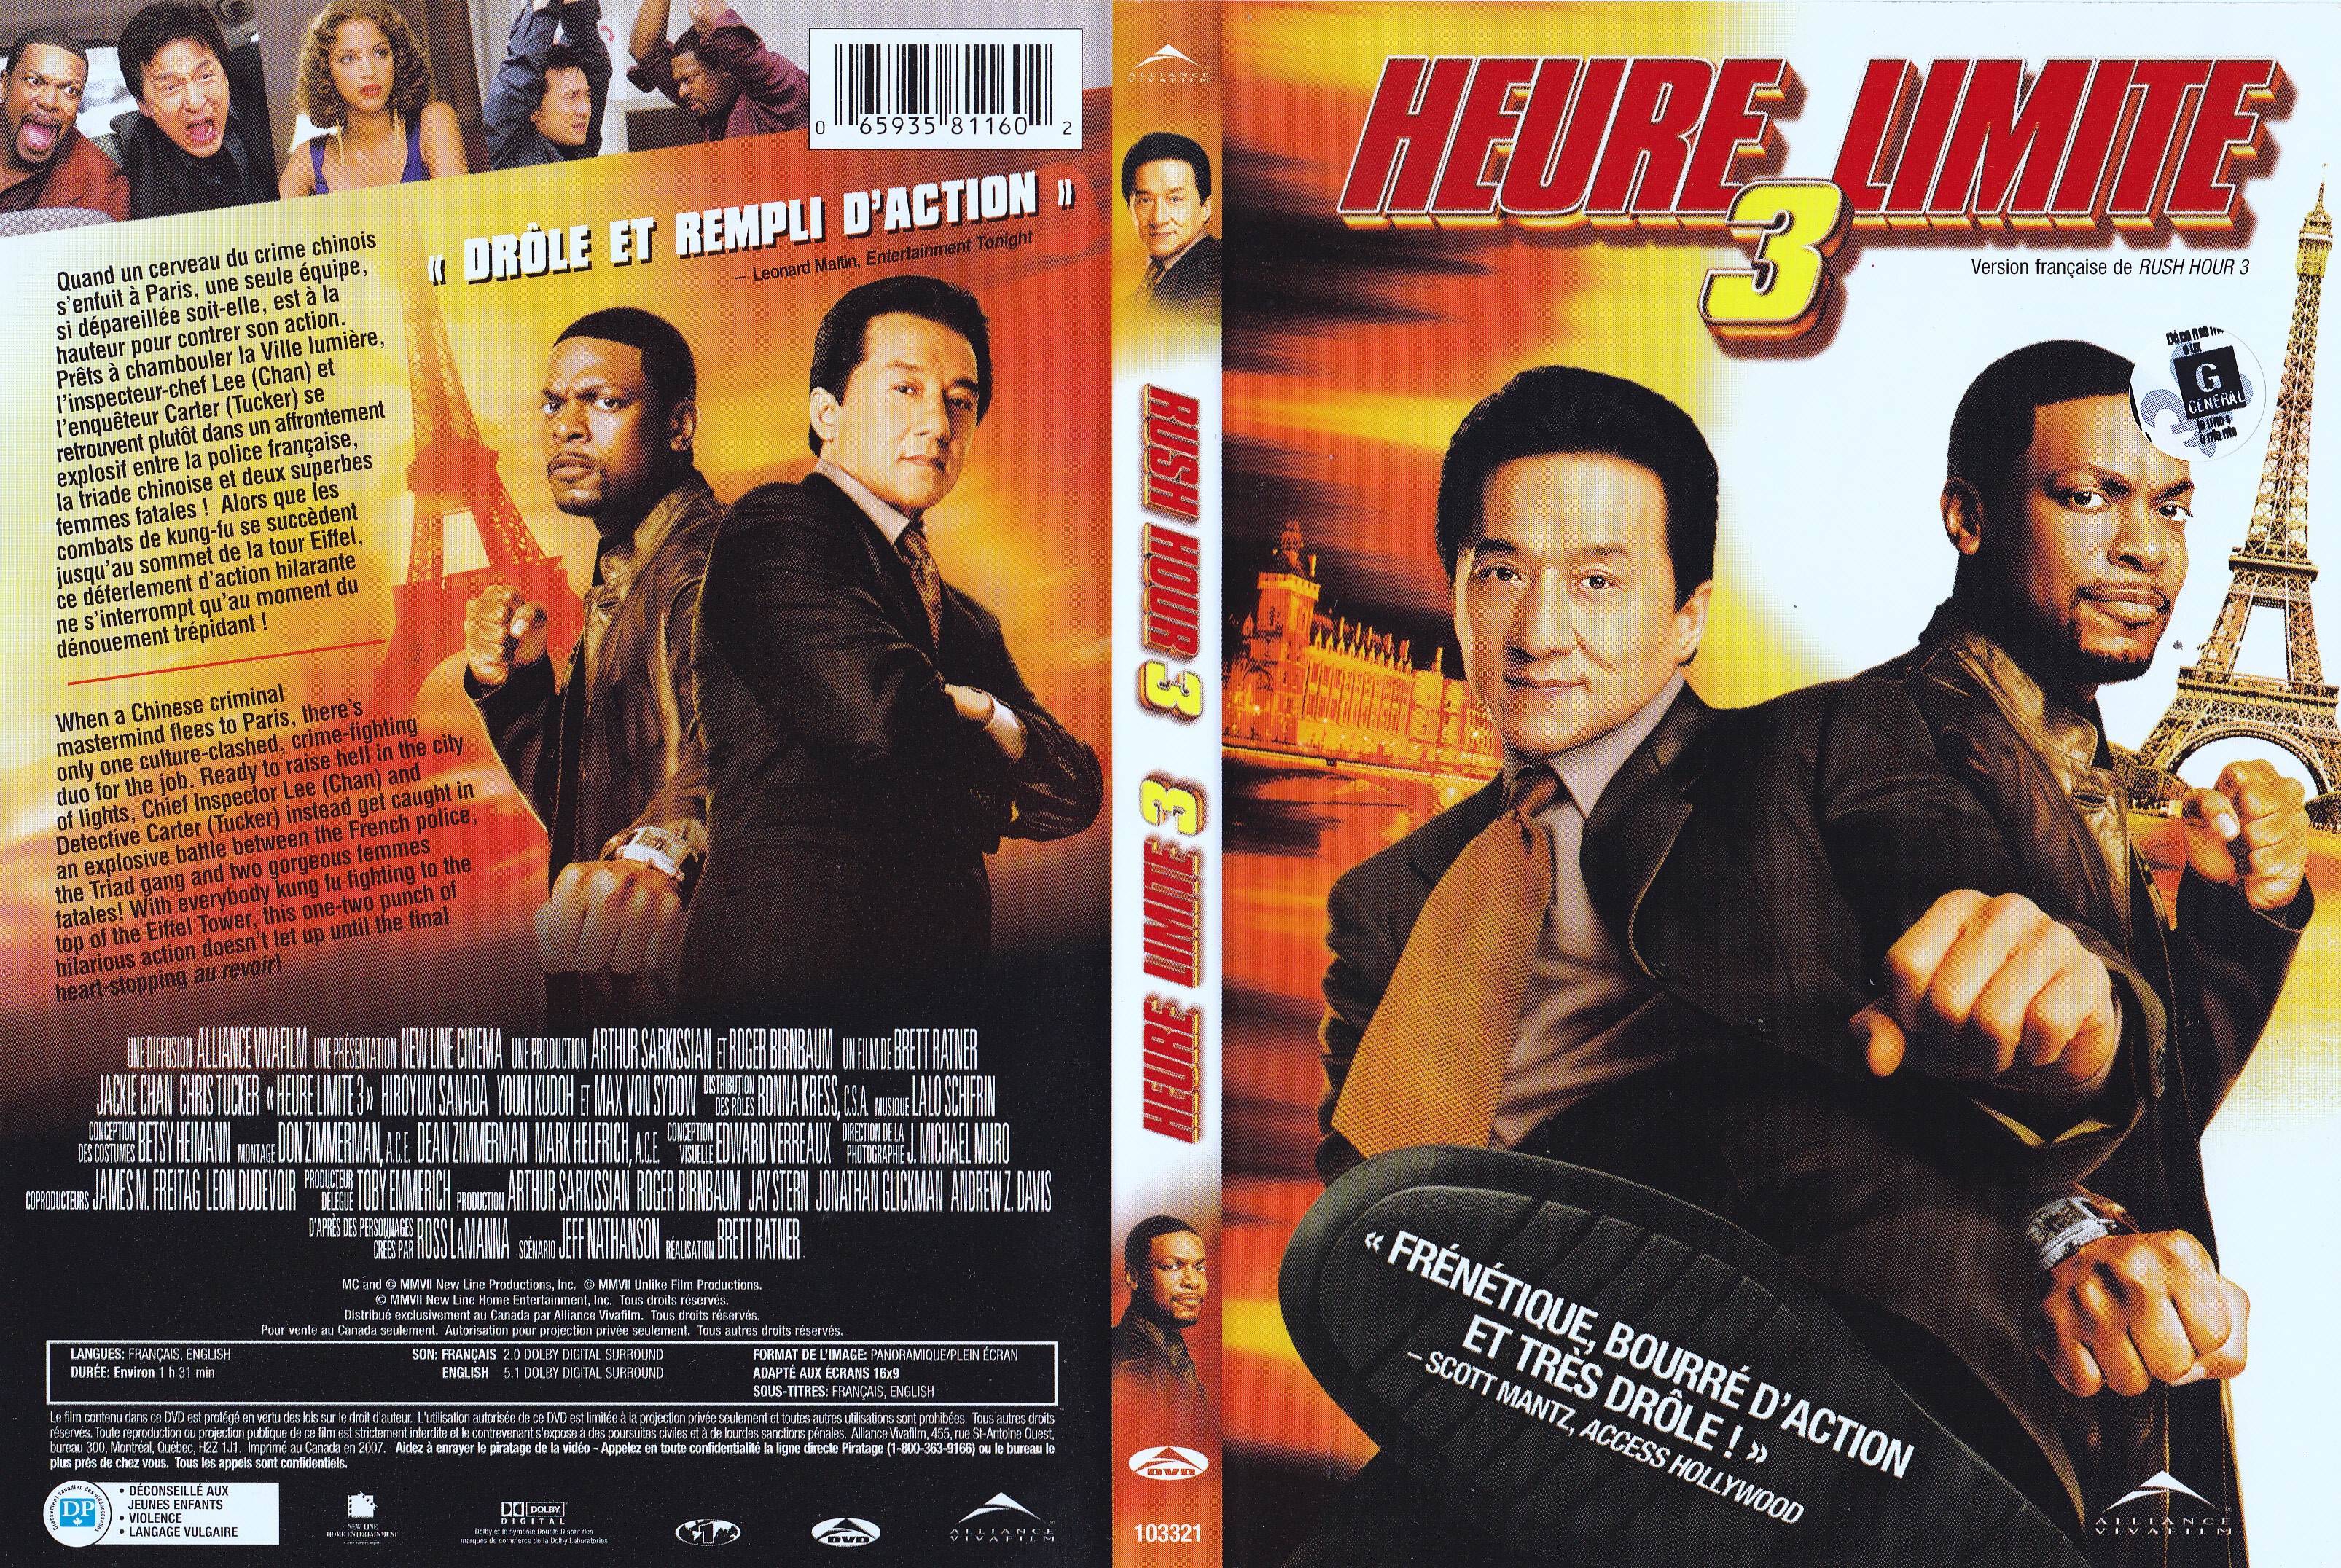 Jaquette DVD Heure limite 3 - Rush hour 3 (Canadienne)